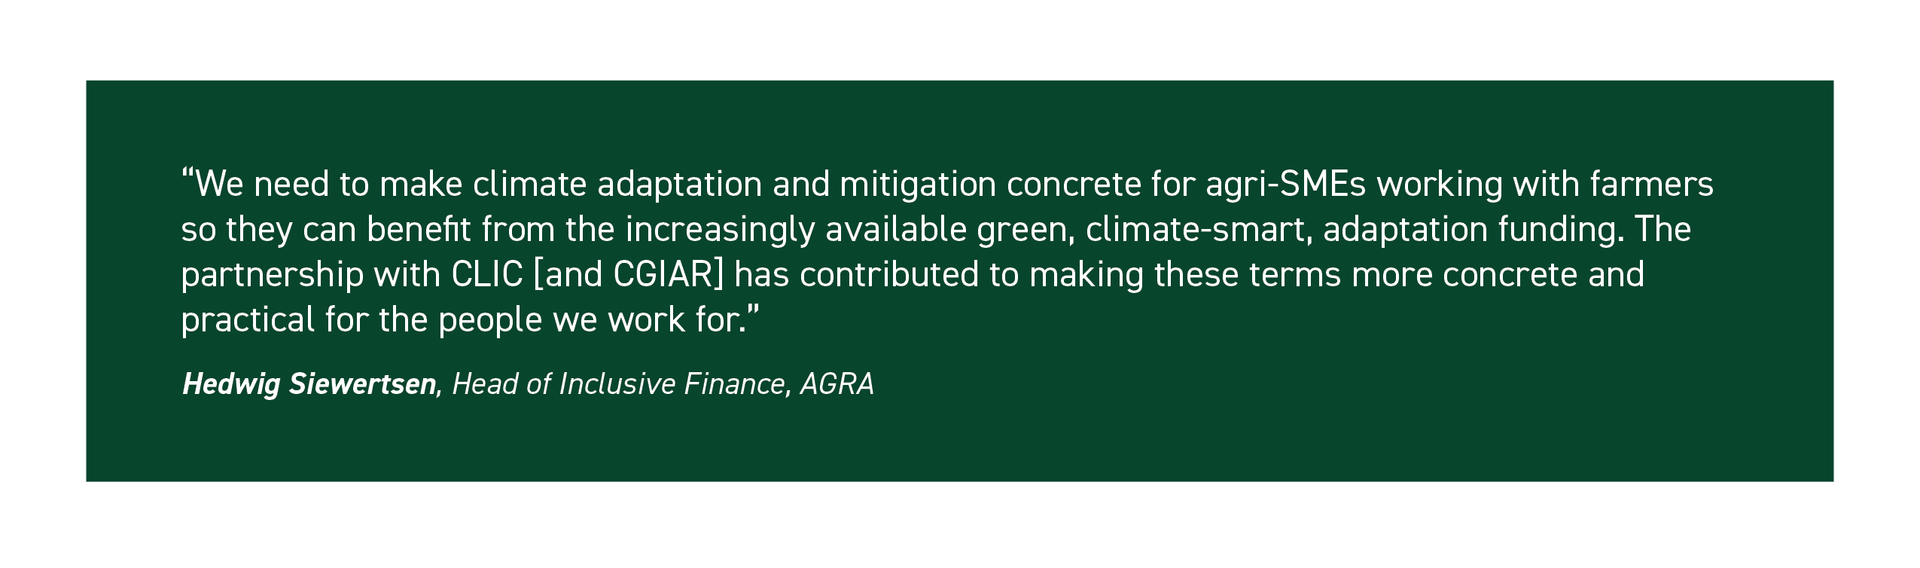 CLIC and CGIAR (ImpactSF) - Quote 2 - Alliance Bioversity International - CIAT